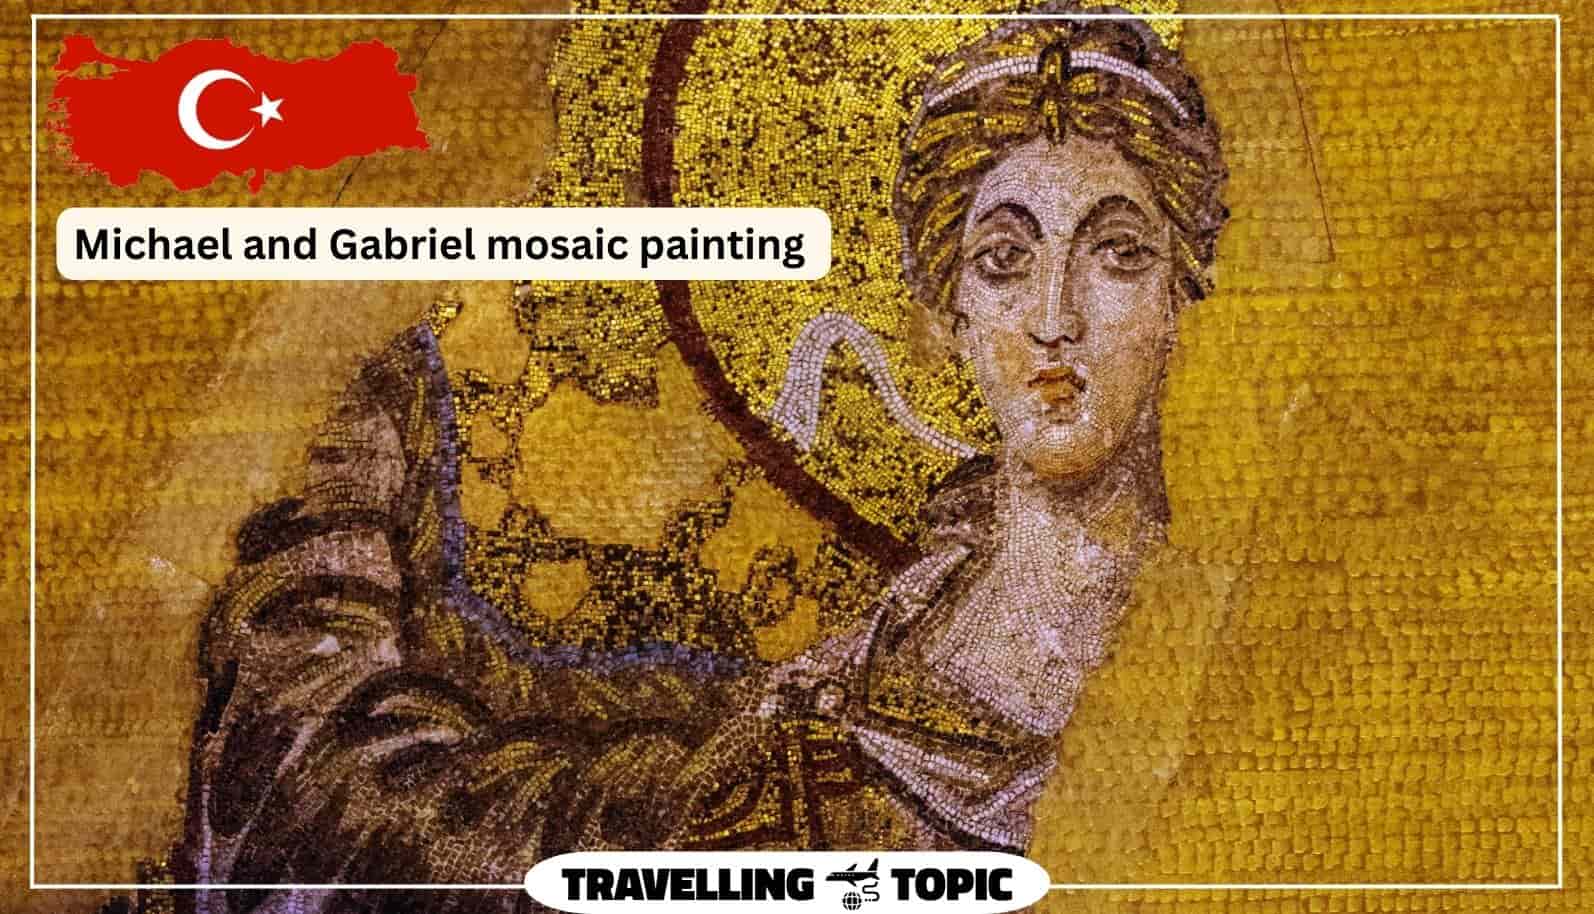 Michael and Gabriel mosaic painting